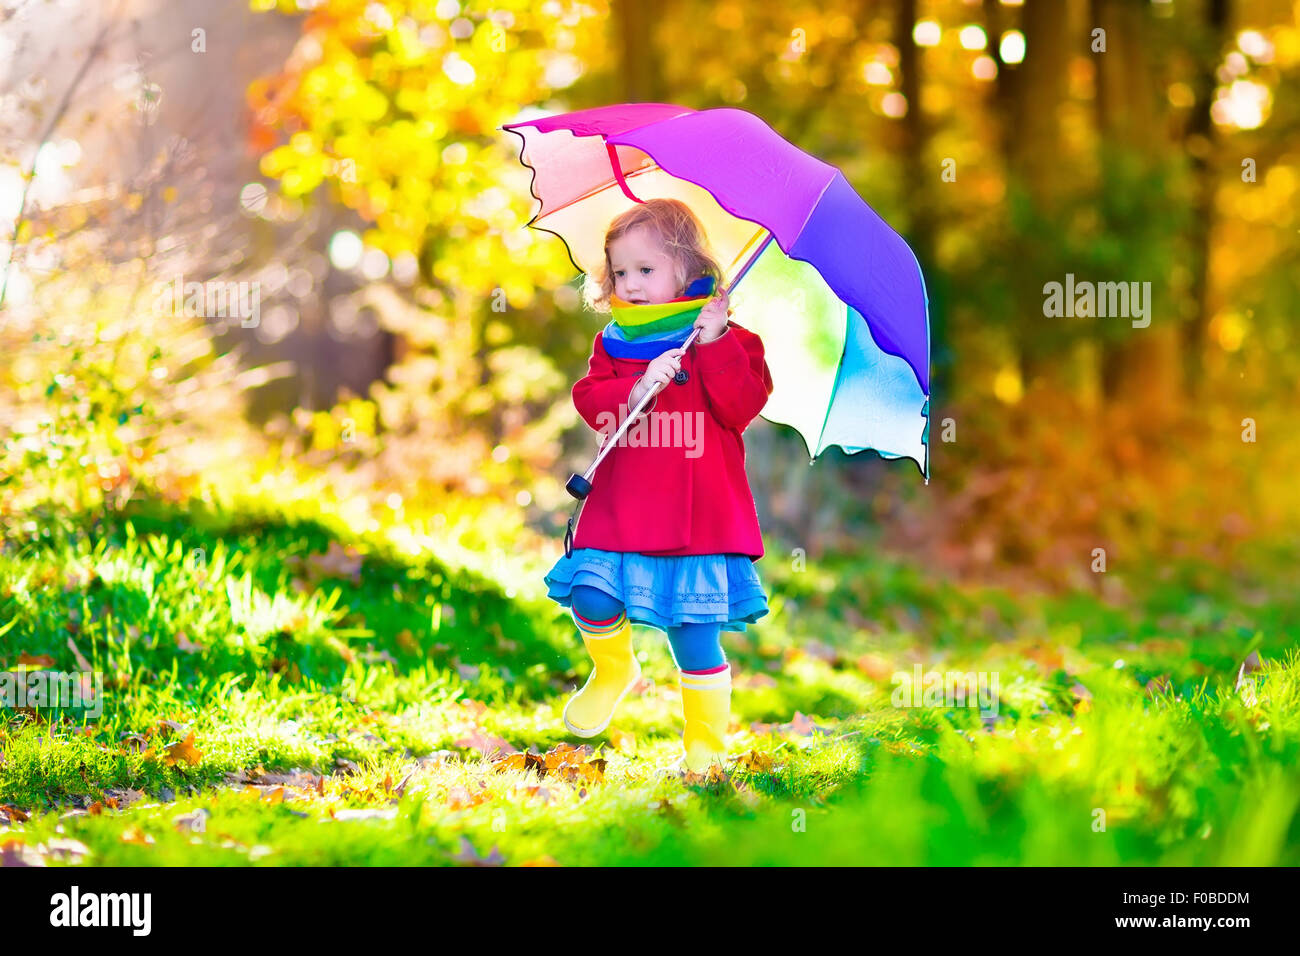 Little girl playing in the rain in autumn park. Child holding umbrella walking in the forest on a sunny fall day Stock Photo